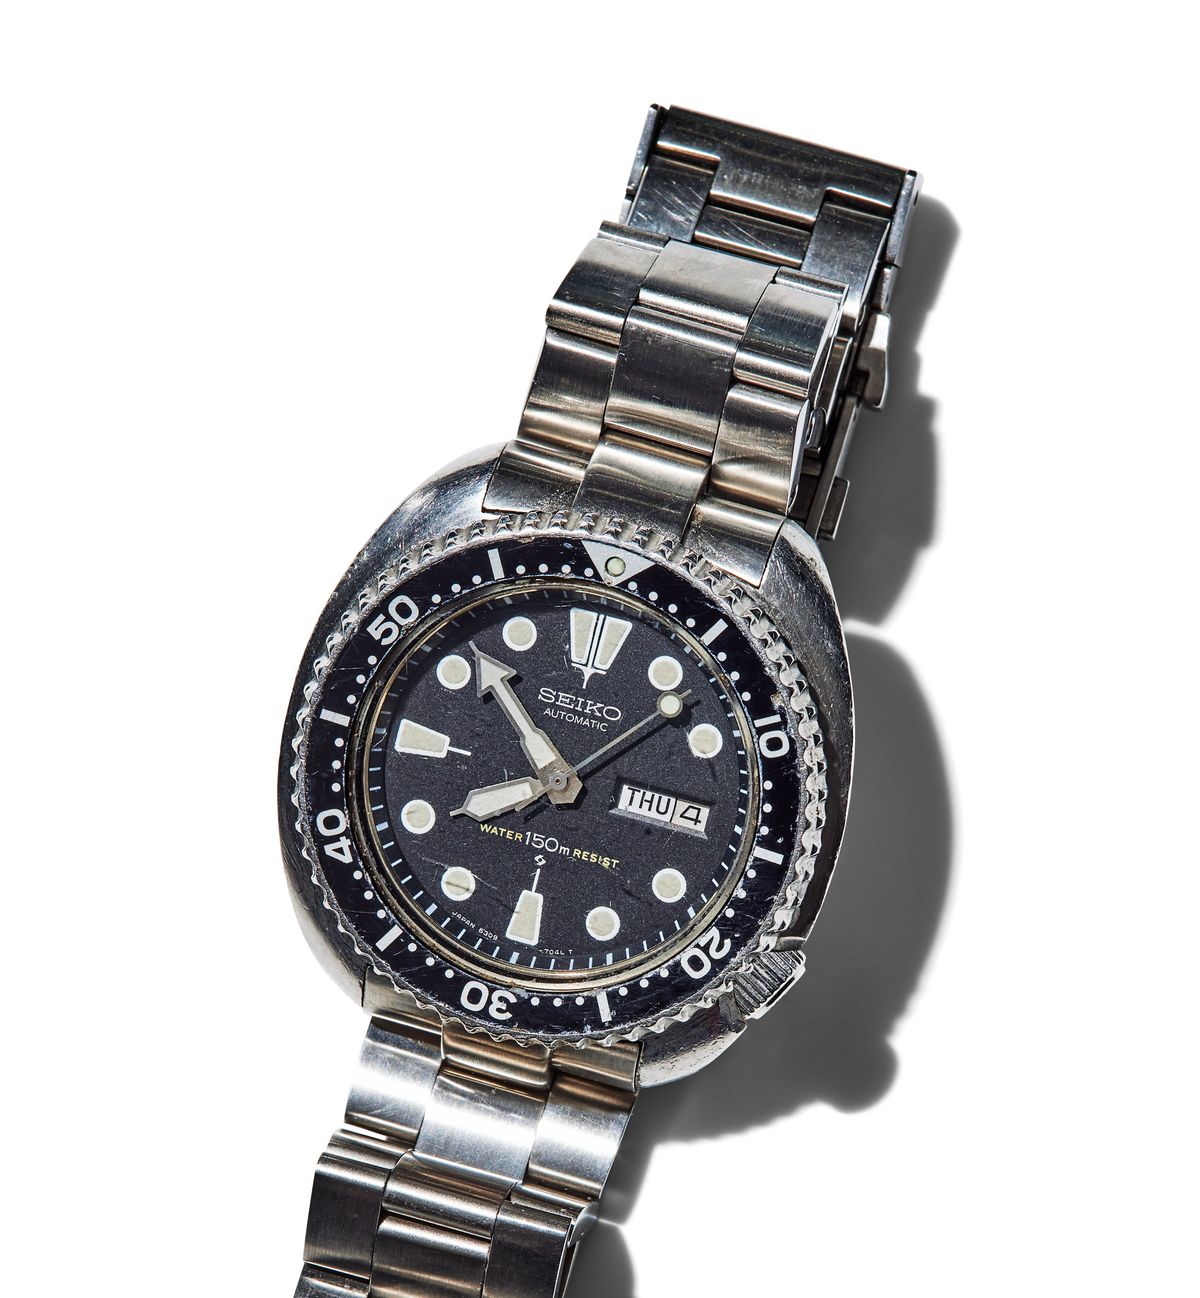 This Seiko Diver Isn't Just a Watch. It's a Reminder.